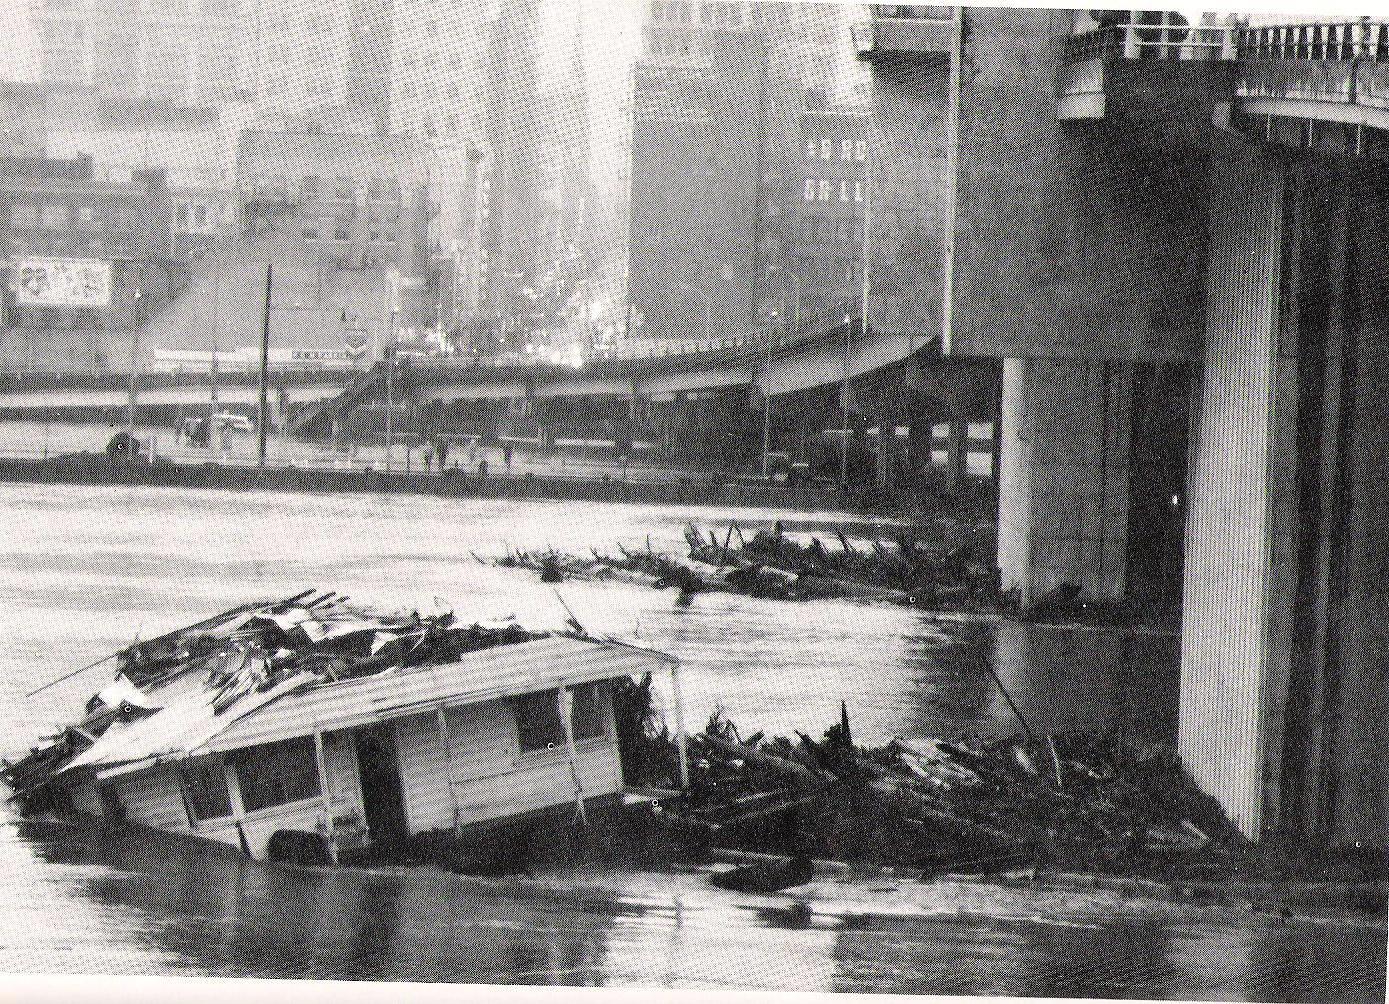 Floating home damaged during Christmas Flood of 1964